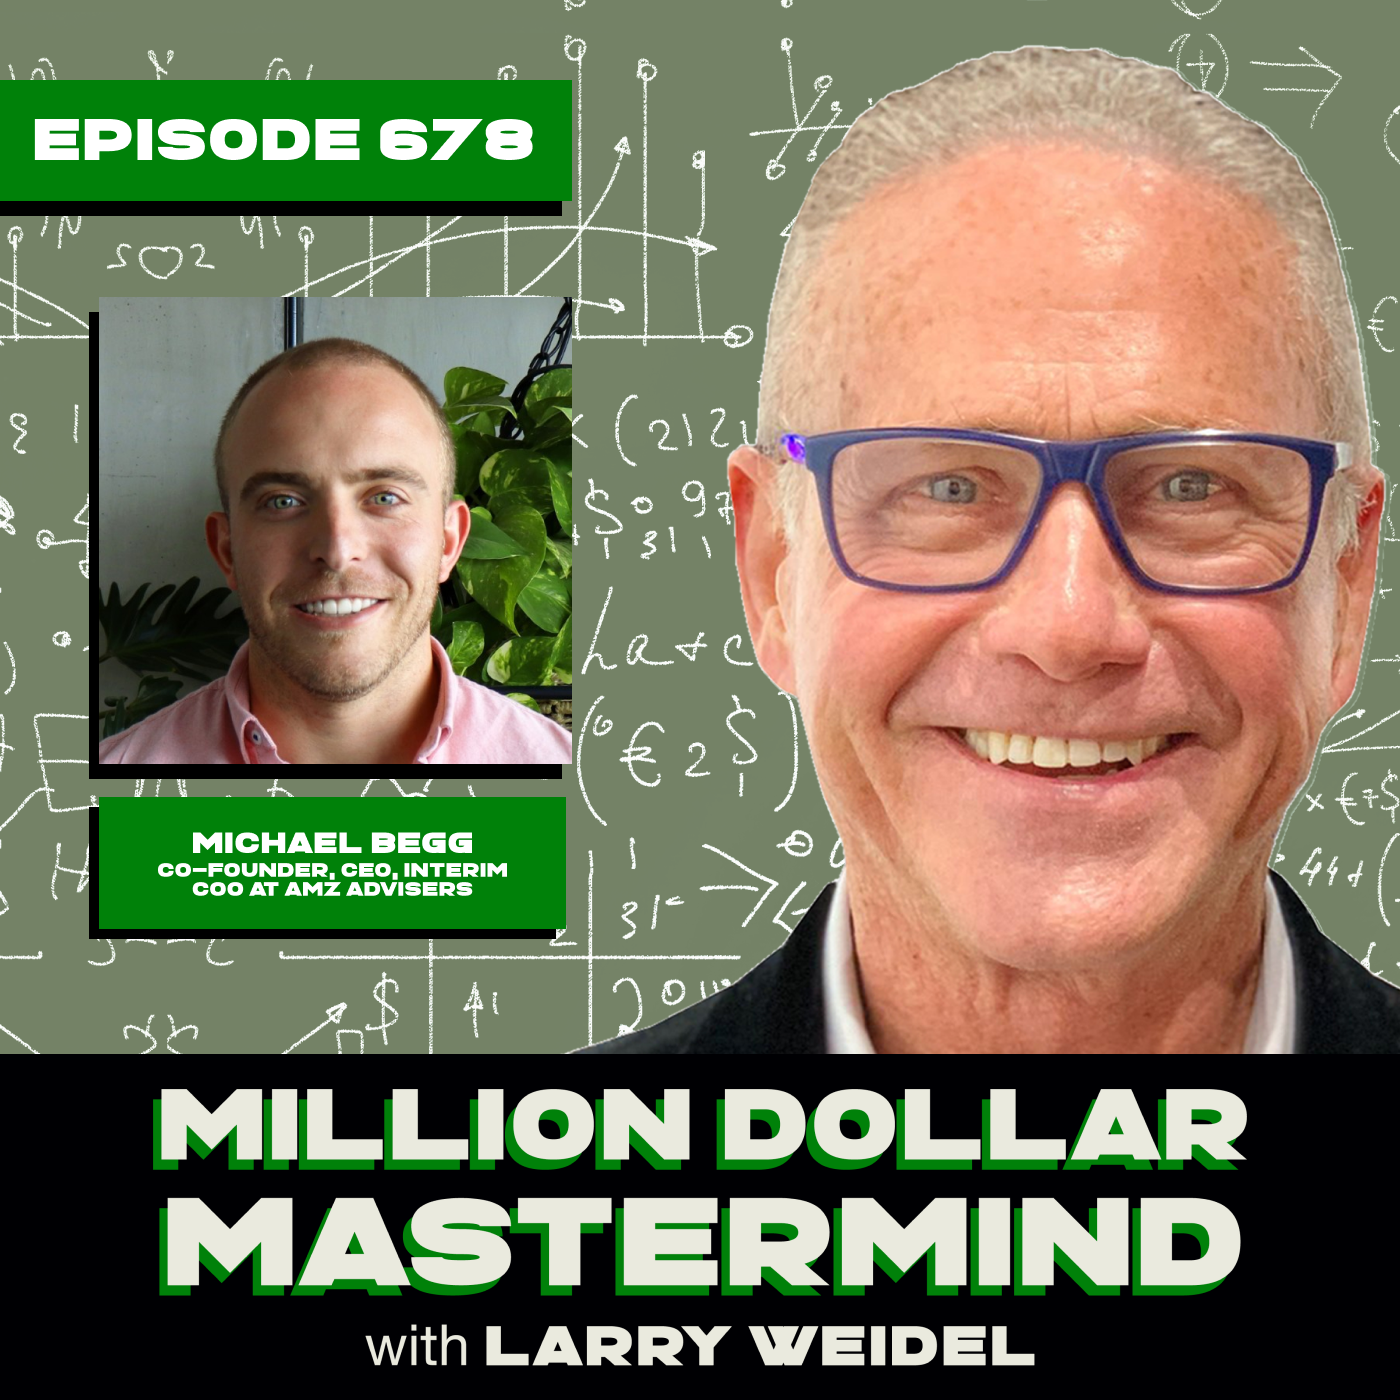 Episode #678 - How To Manage Your Goals & Expectations with Mike Begg, Co-Founder of AMZ Advisors